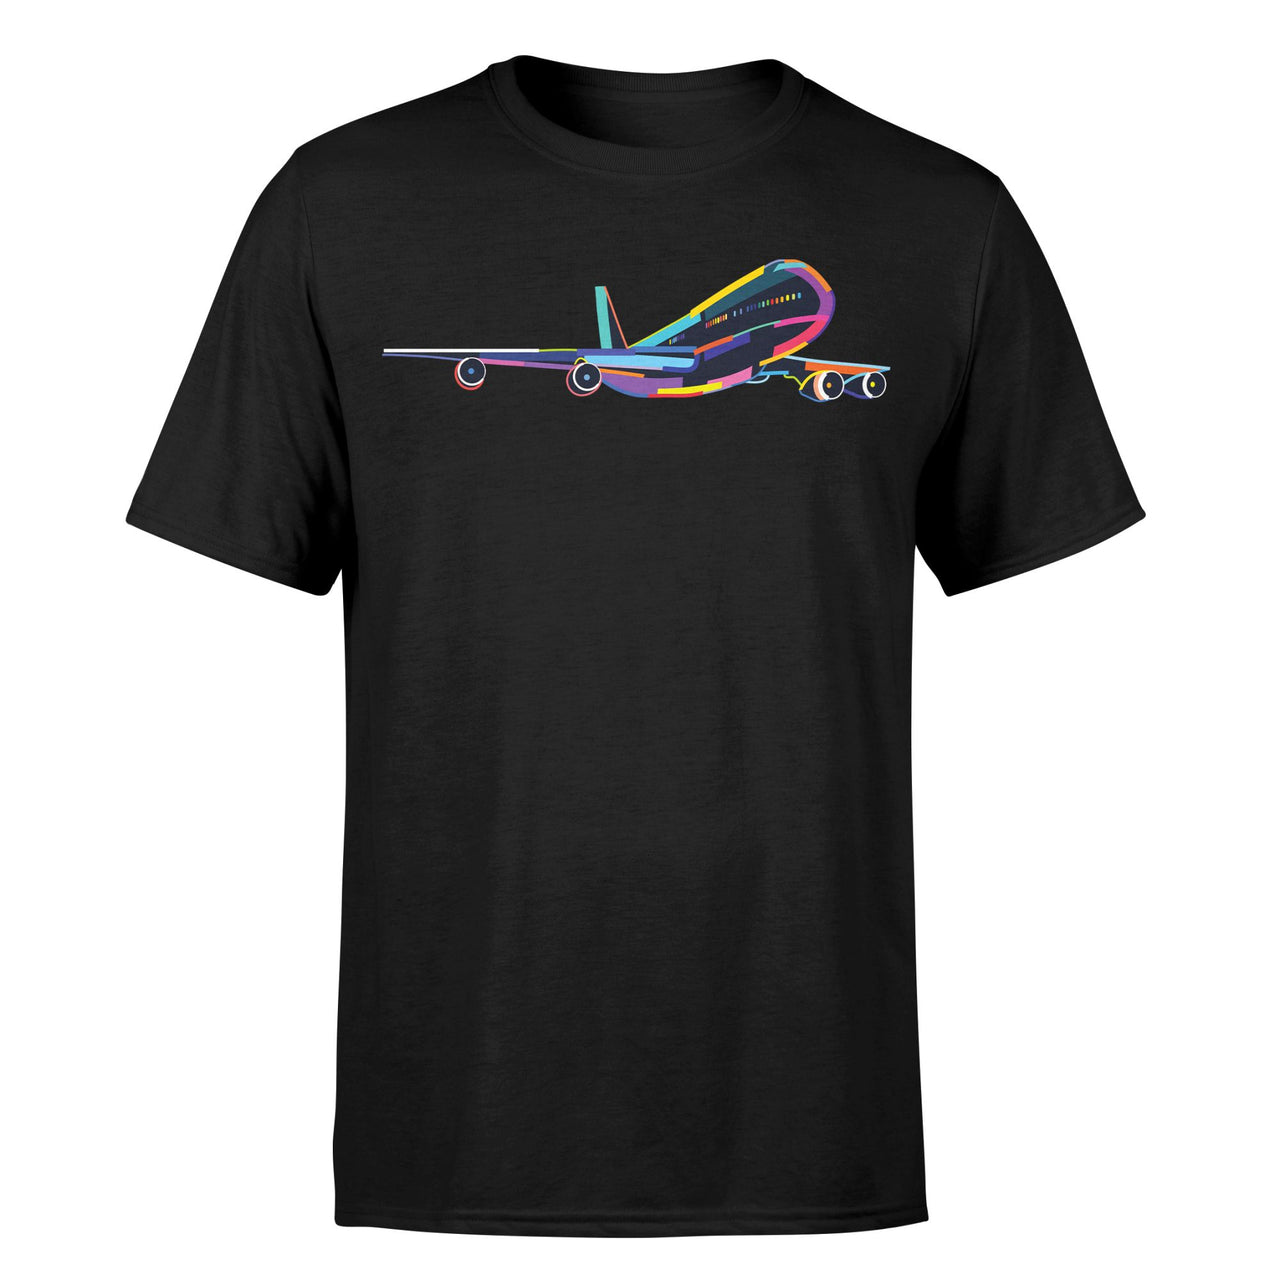 Multicolor Airplane Designed T-Shirts